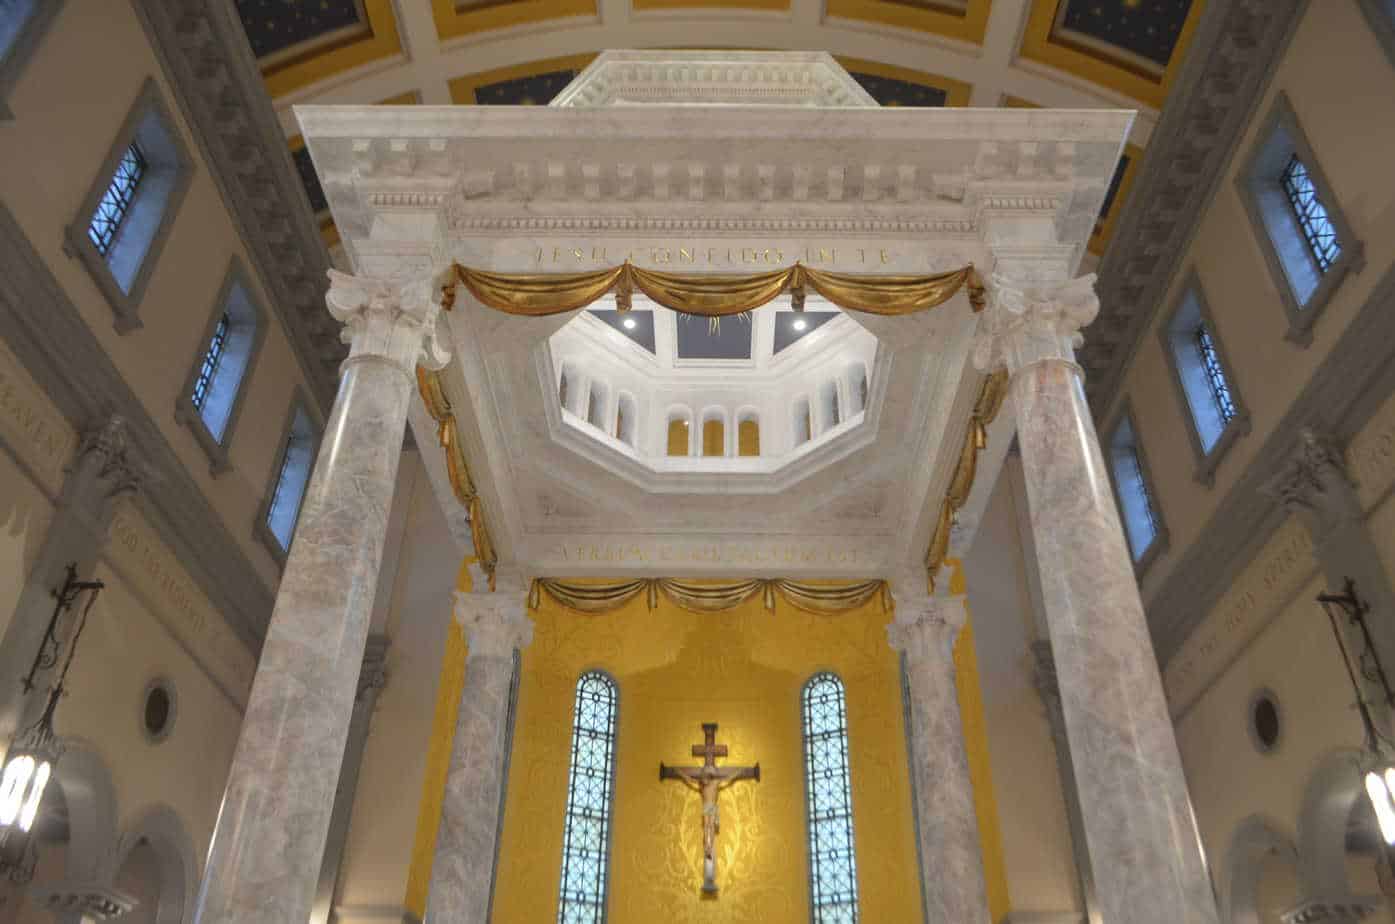 Closer view of the canopy of the altar of Sacred Heart Cathedral in Knoxville, TN